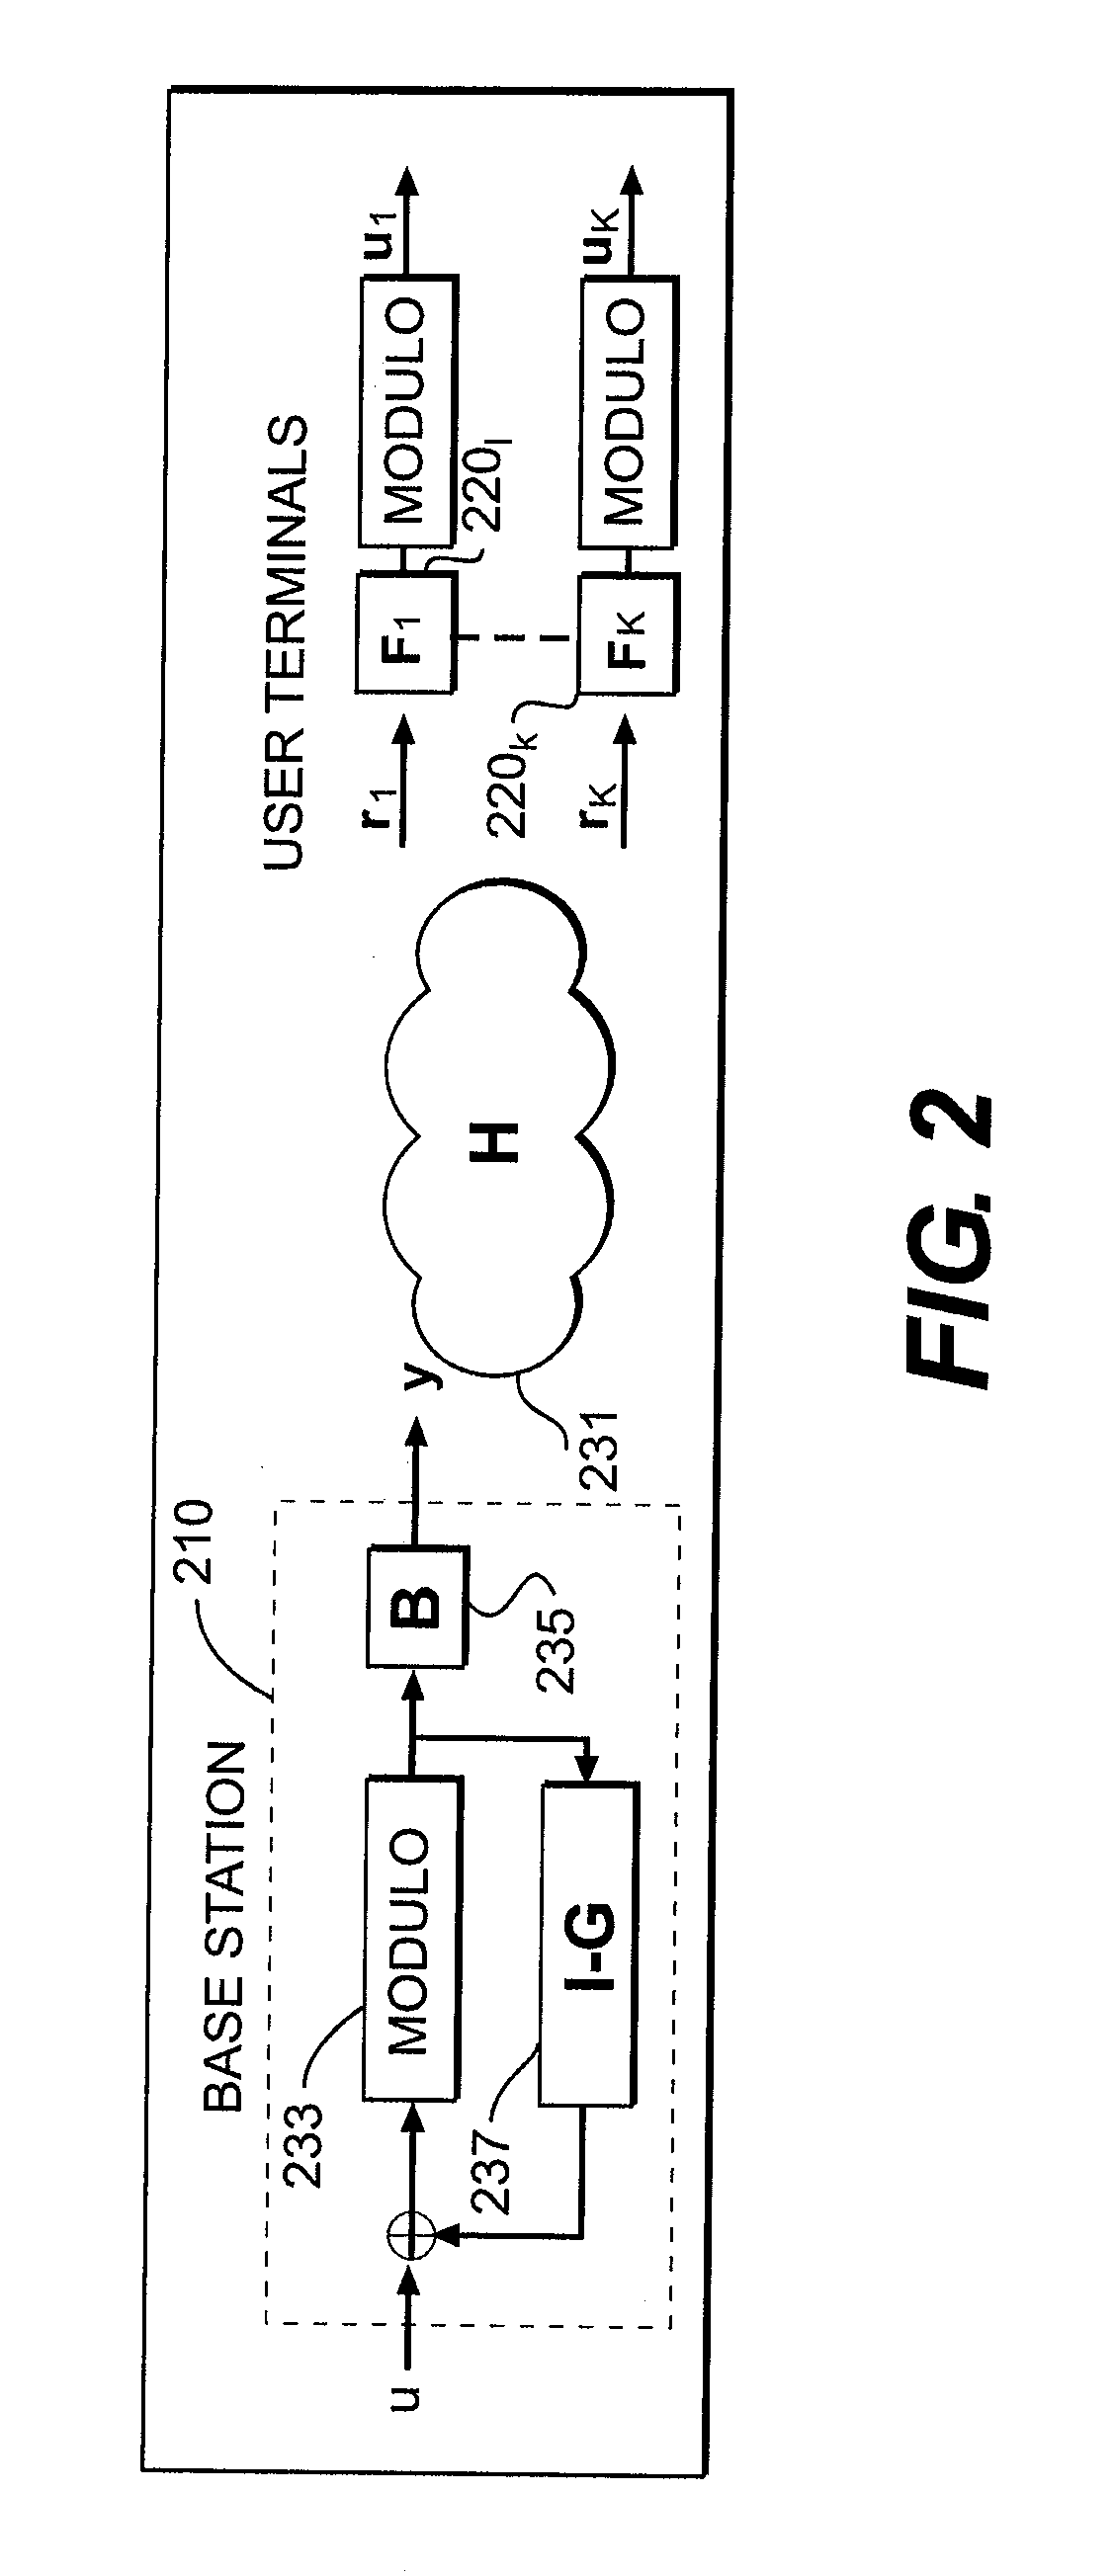 Generalized decision feedback equalizer precoder with receiver beamforming for matrix calculations in multi-user multiple-input multiple-output wireless transmission systems